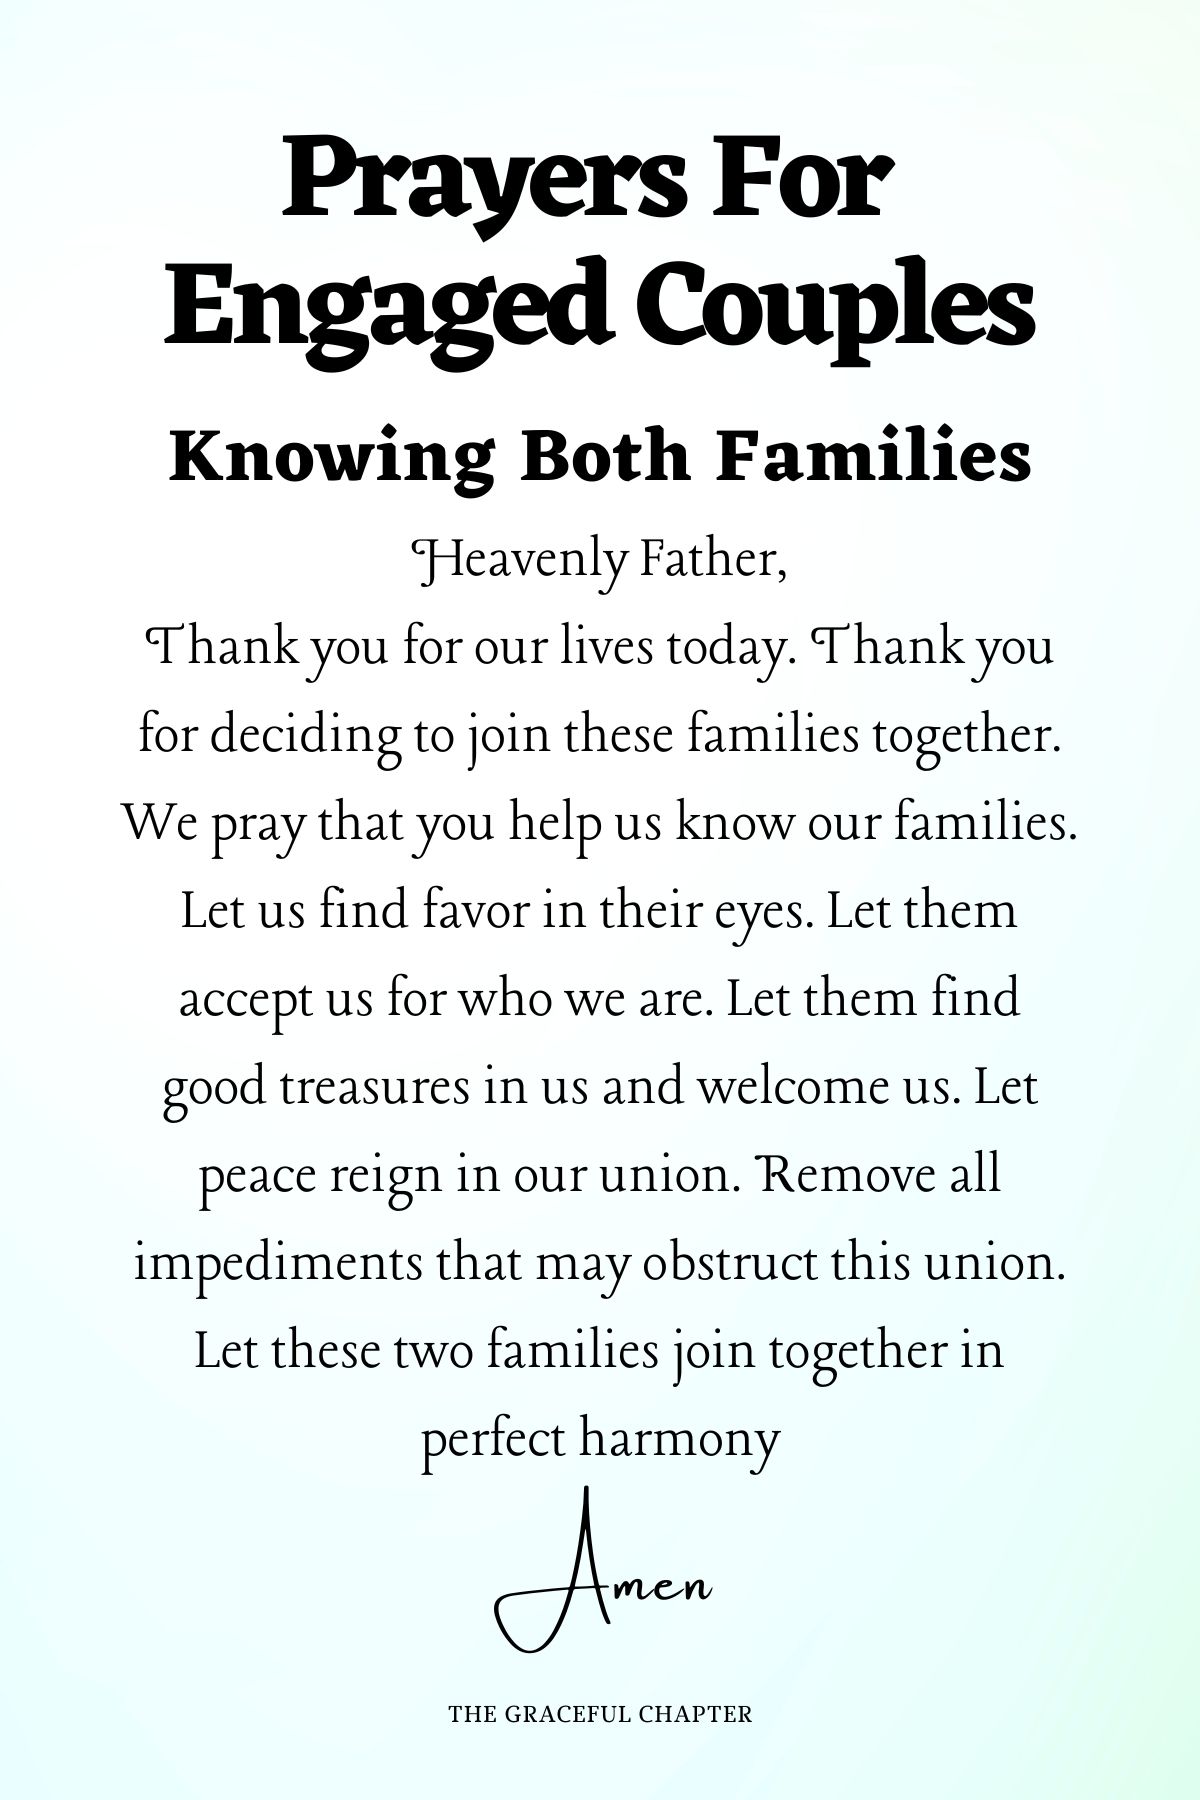  prayers for engaged couples  Knowing both families